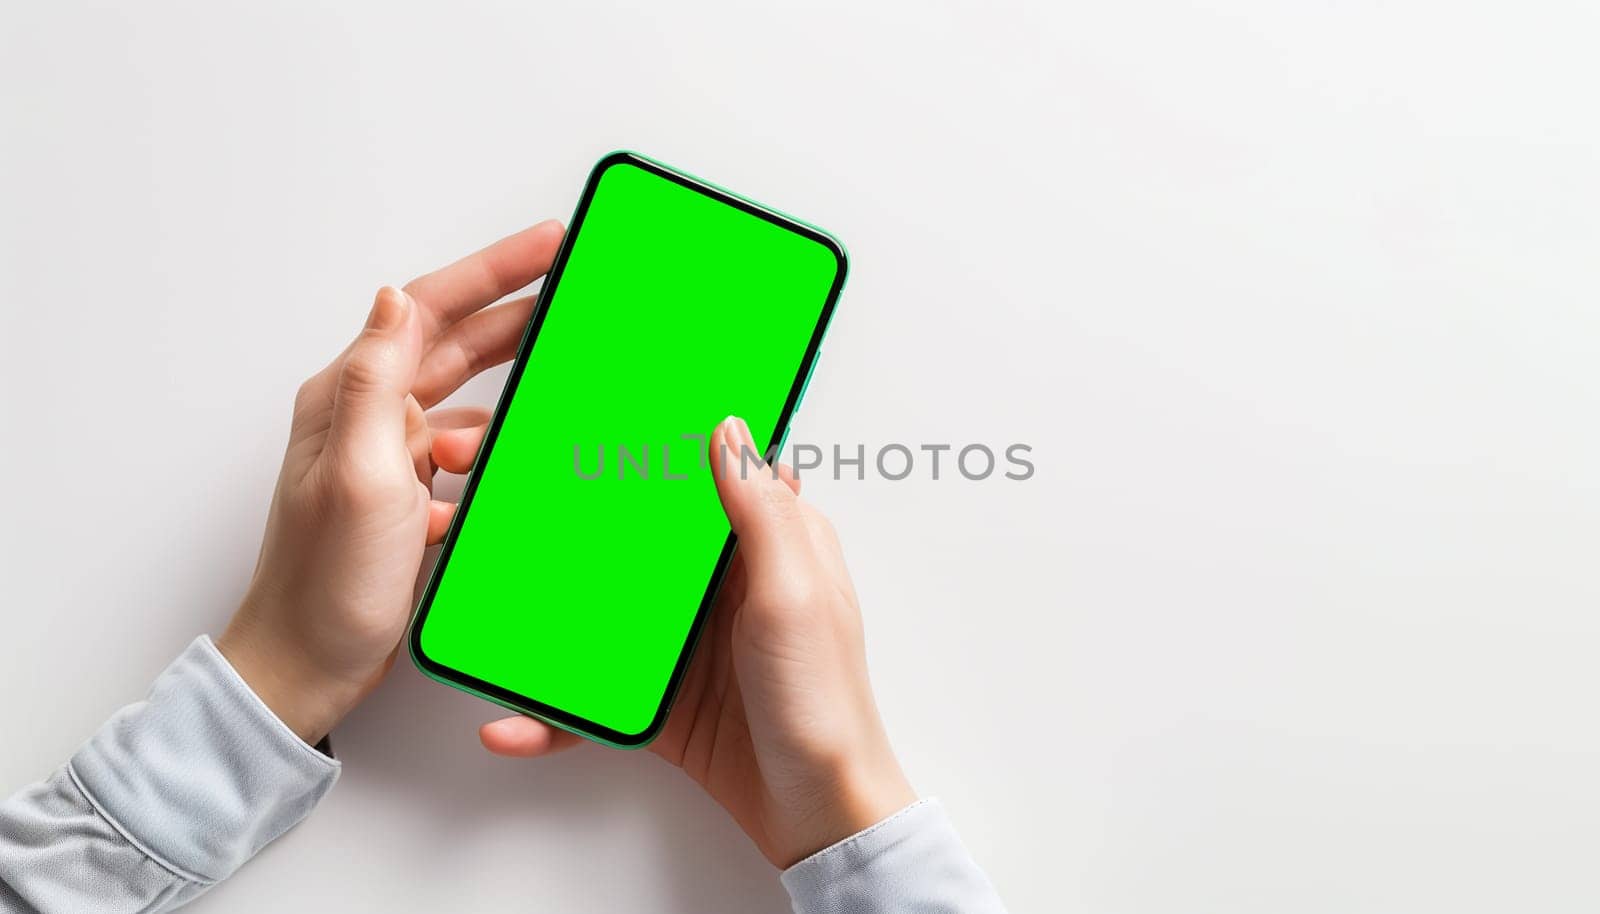 Hand holding smartphone green screen isolated on white background